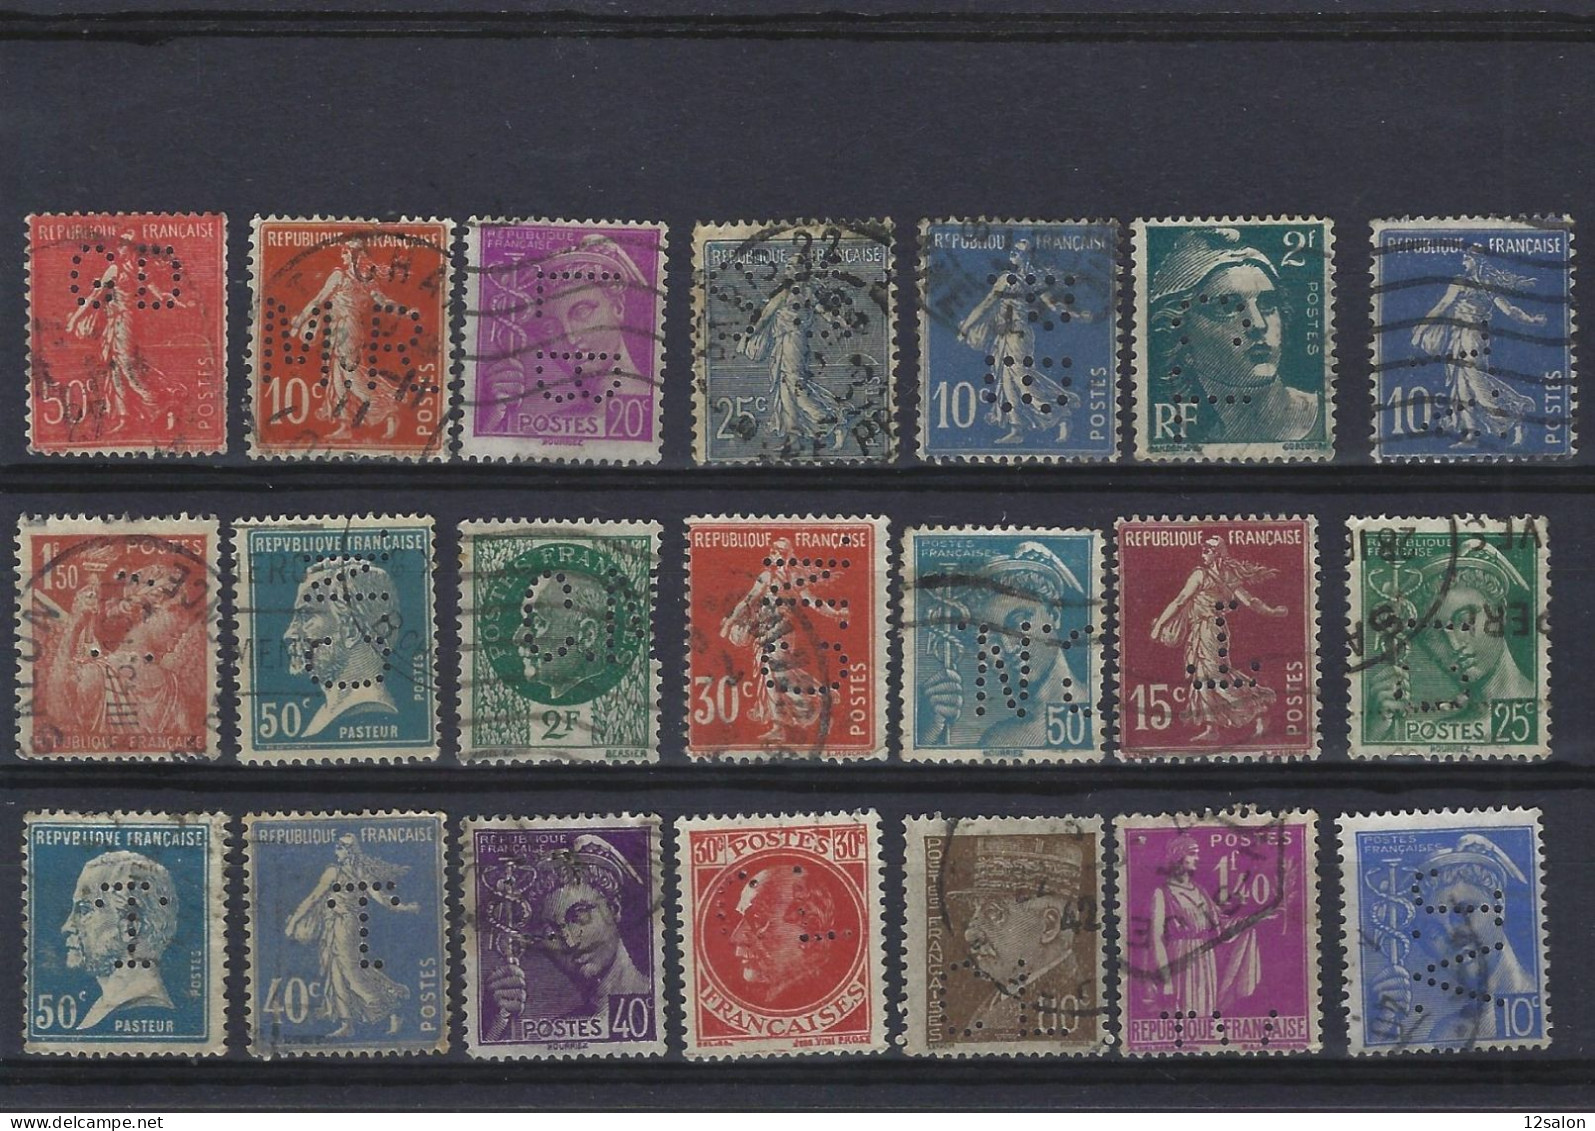 FRANCE TIMBRE LOT 2 PERFORE PERFORES PERFIN PERFINS PERFO PERFORATION PERFORIERT - Usati